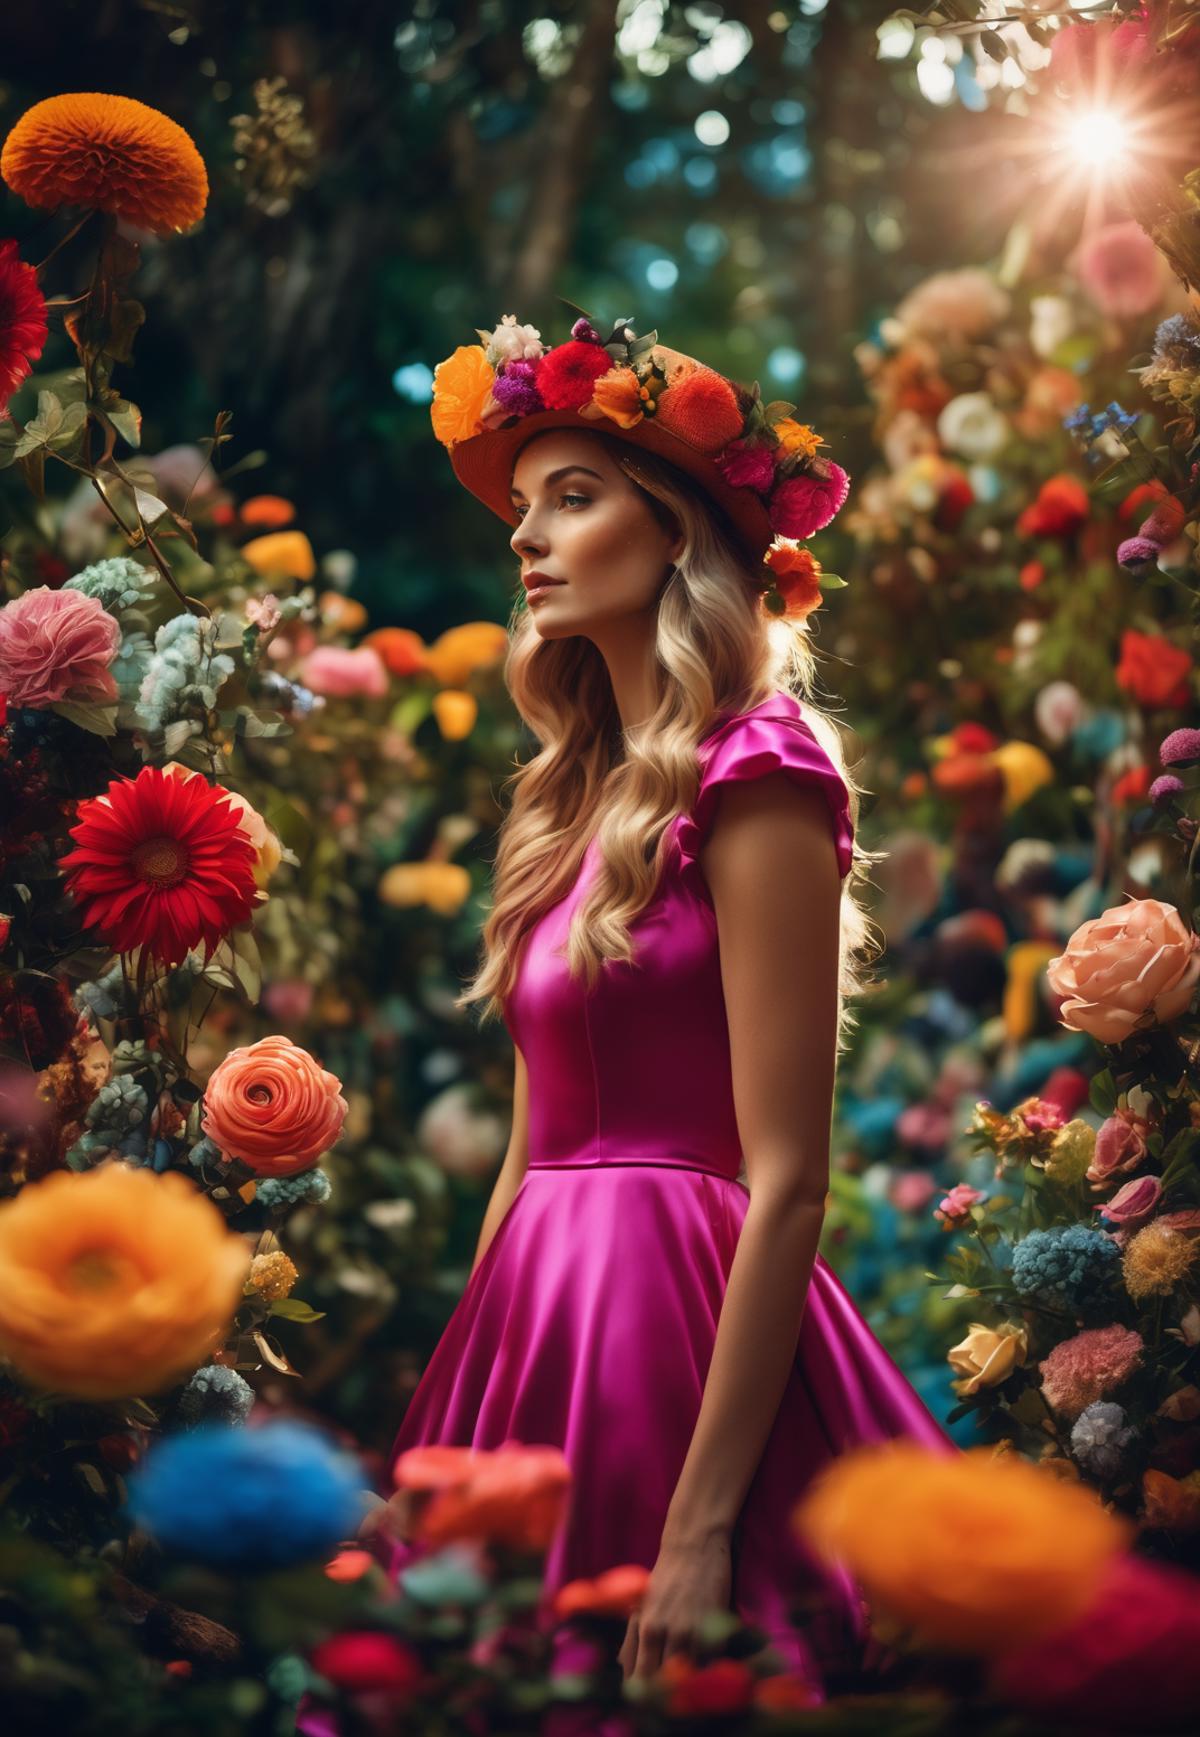 A woman wearing a pink dress and a flower crown, surrounded by colorful flowers.